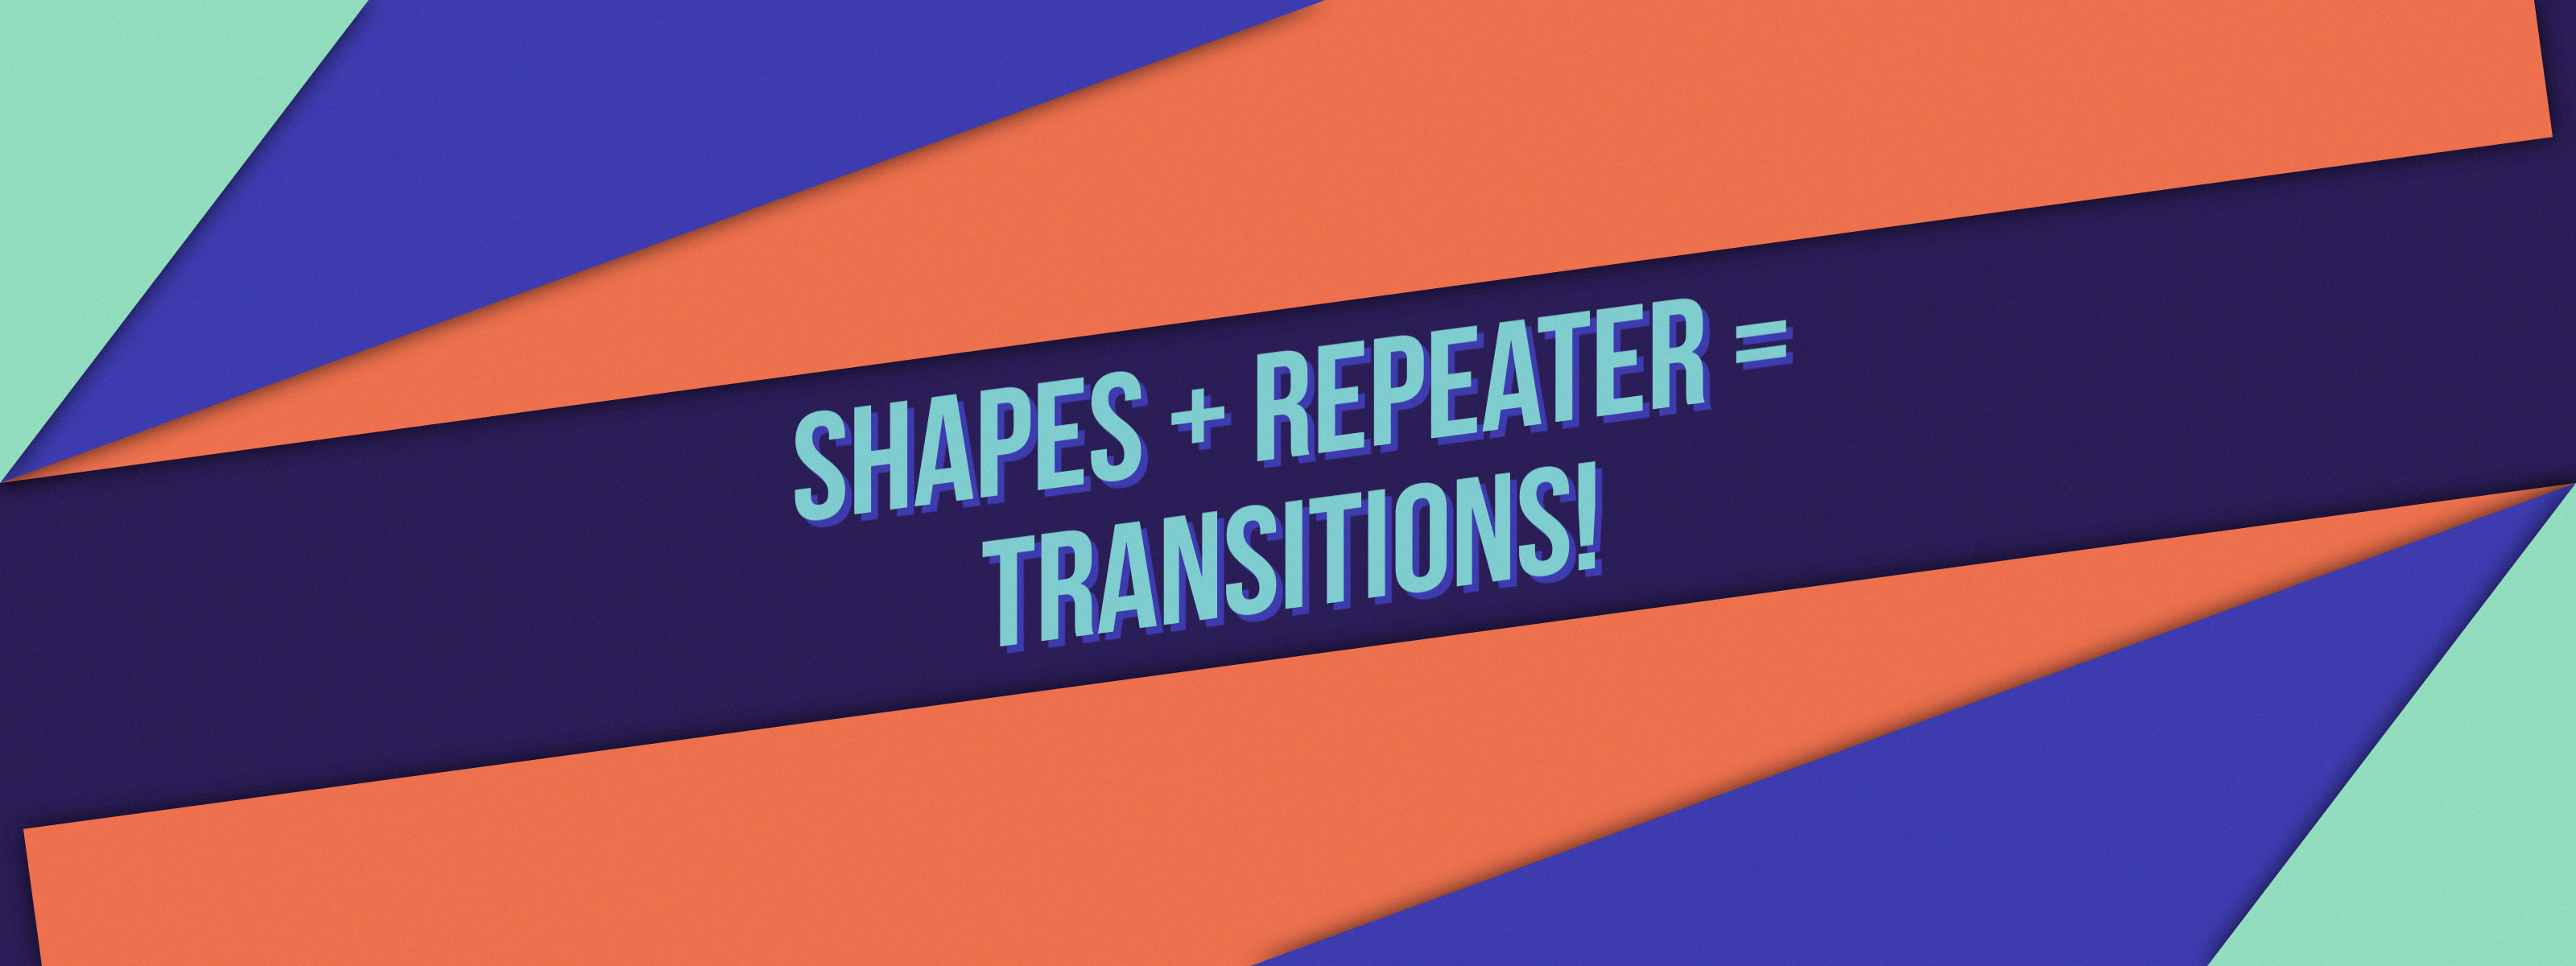 awesome after effects transitions